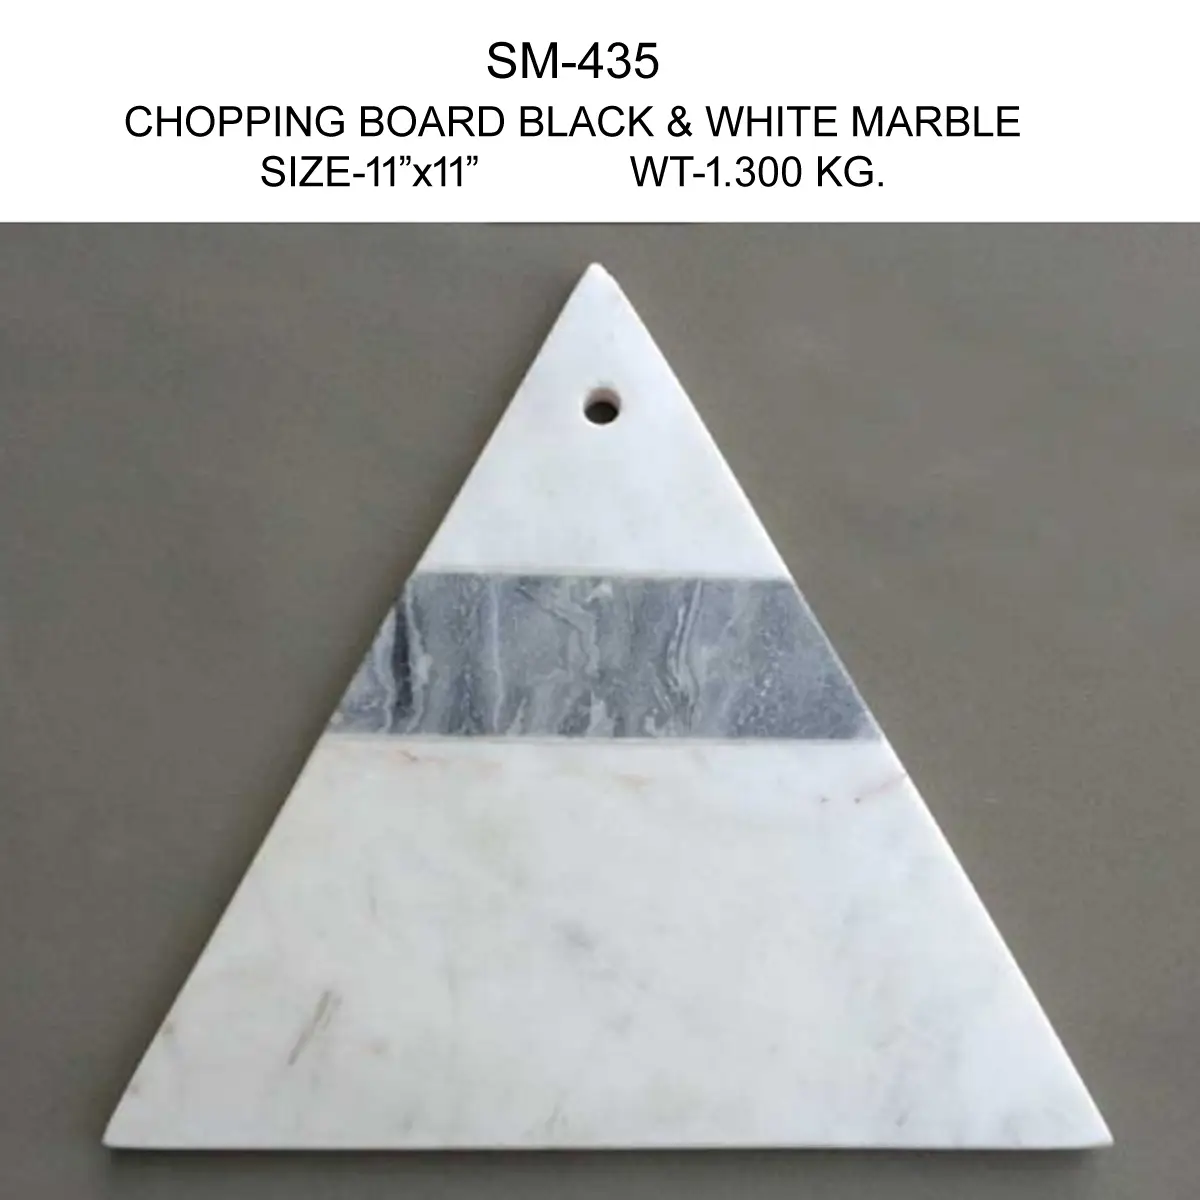 CHOPPING BOARD WHITE AND BLACK MARBLE